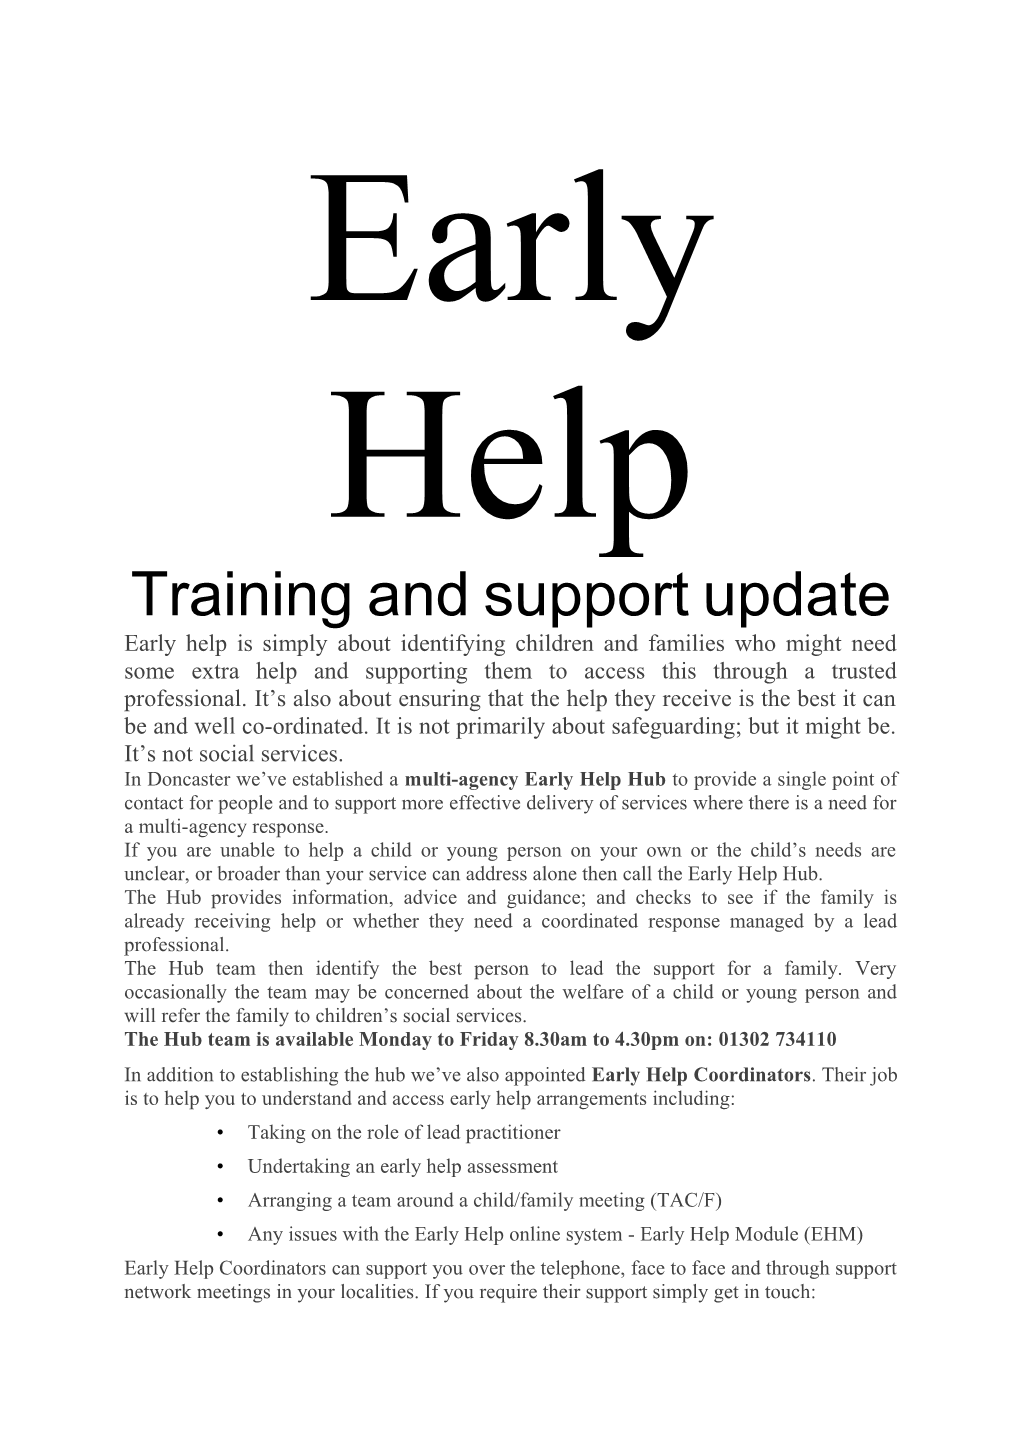 Training and Support Update